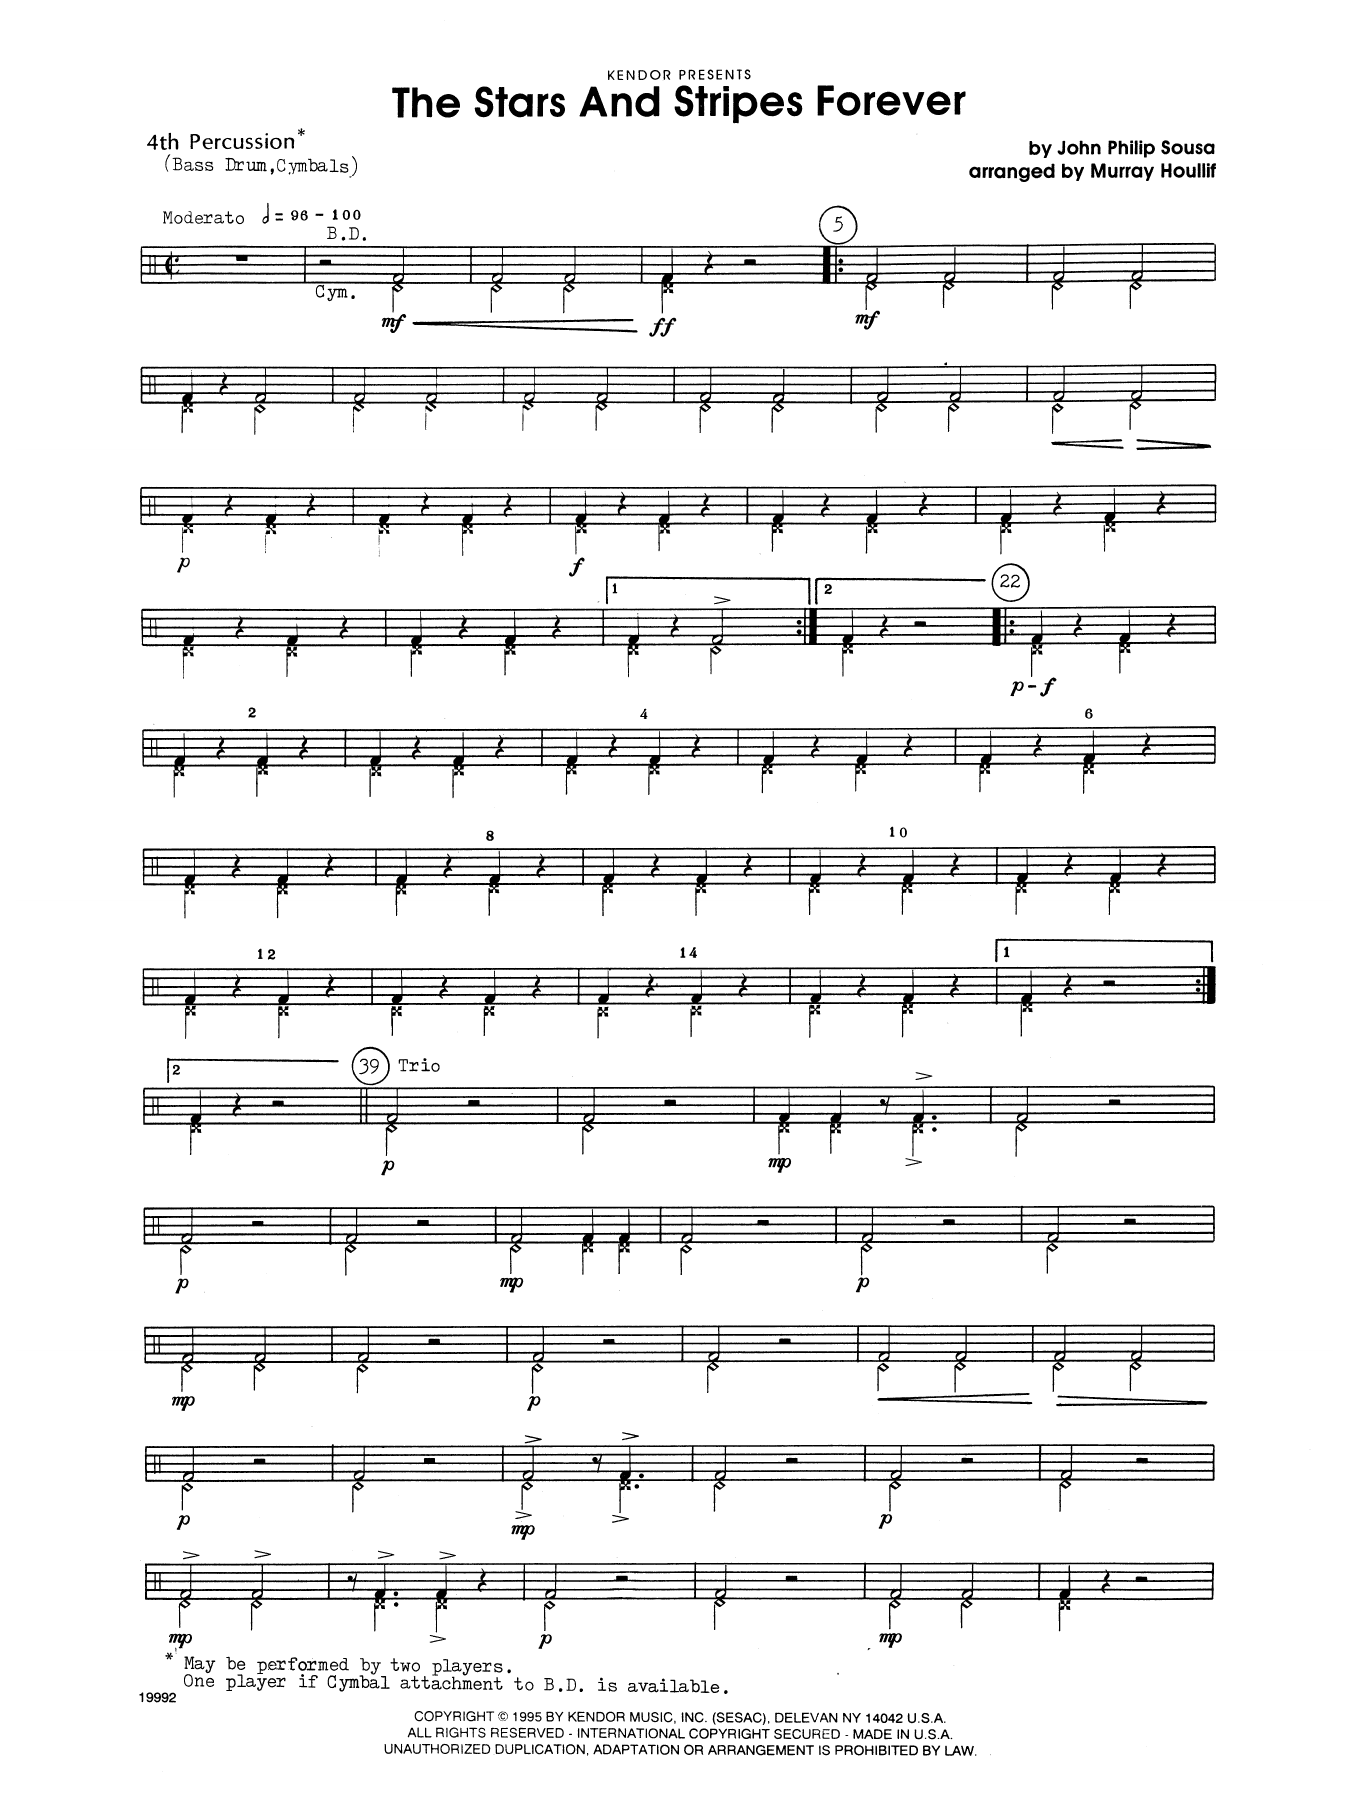 Download Murray Houllif The Stars and Stripes Forever - Percuss Sheet Music